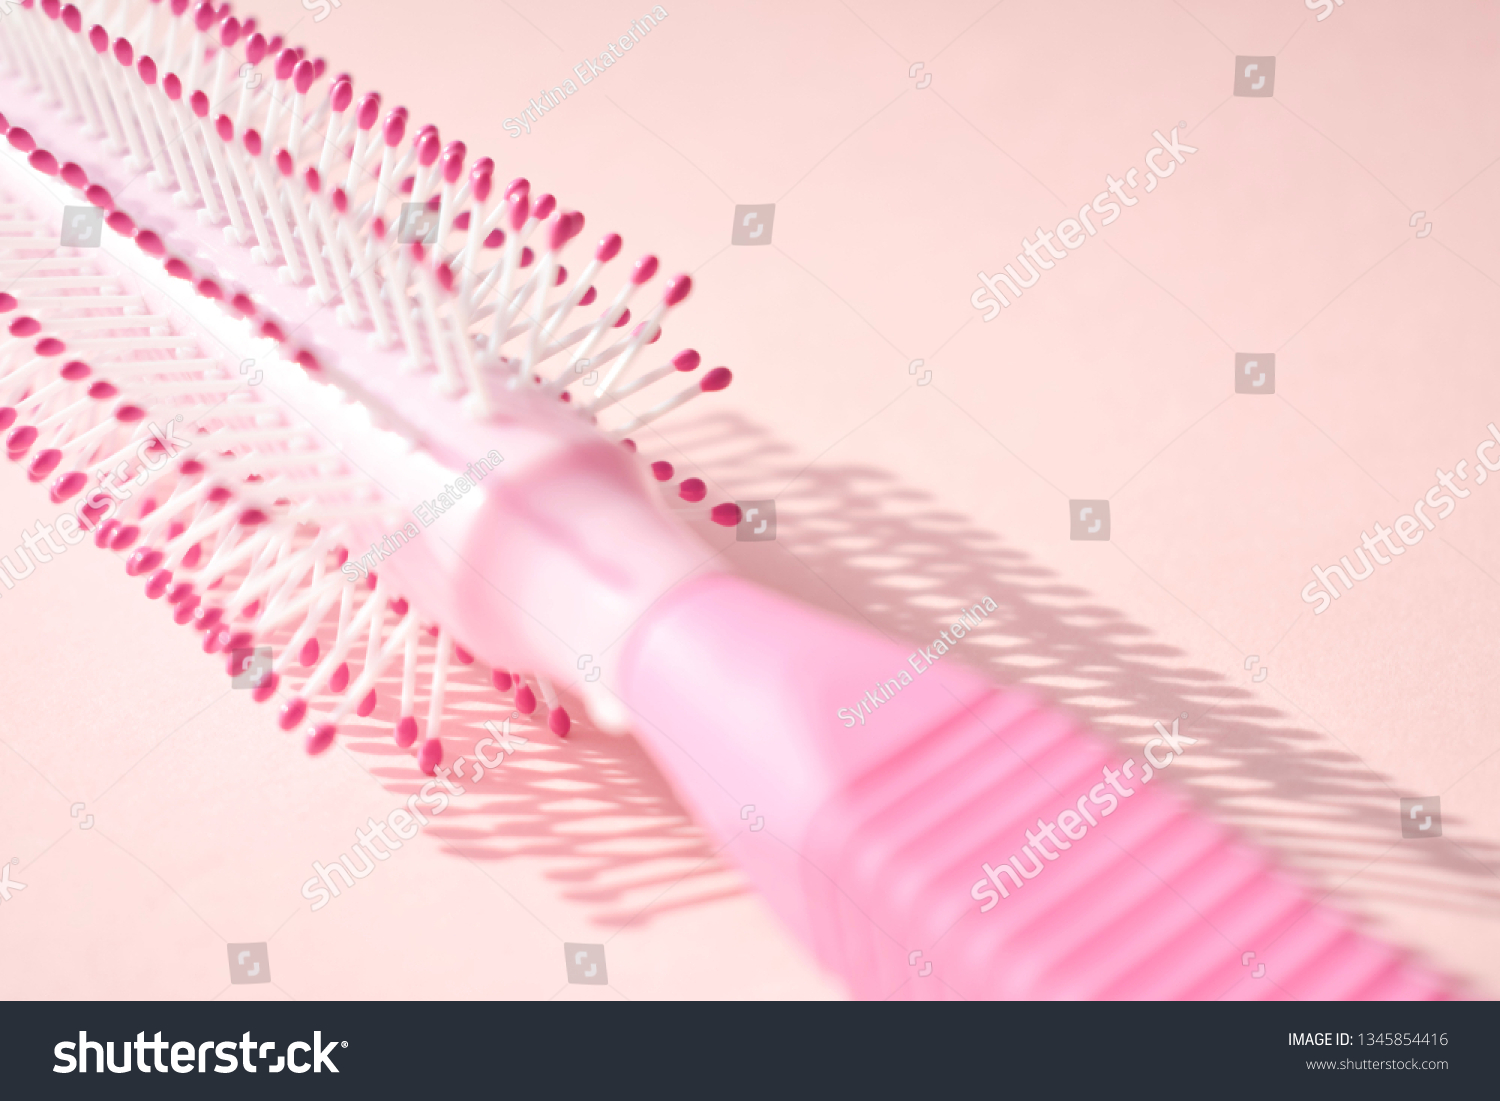 Pink comb on white background. Background. Hygienic environments. Personal hygiene. Hygiene products. Hair. To comb the hair. #1345854416